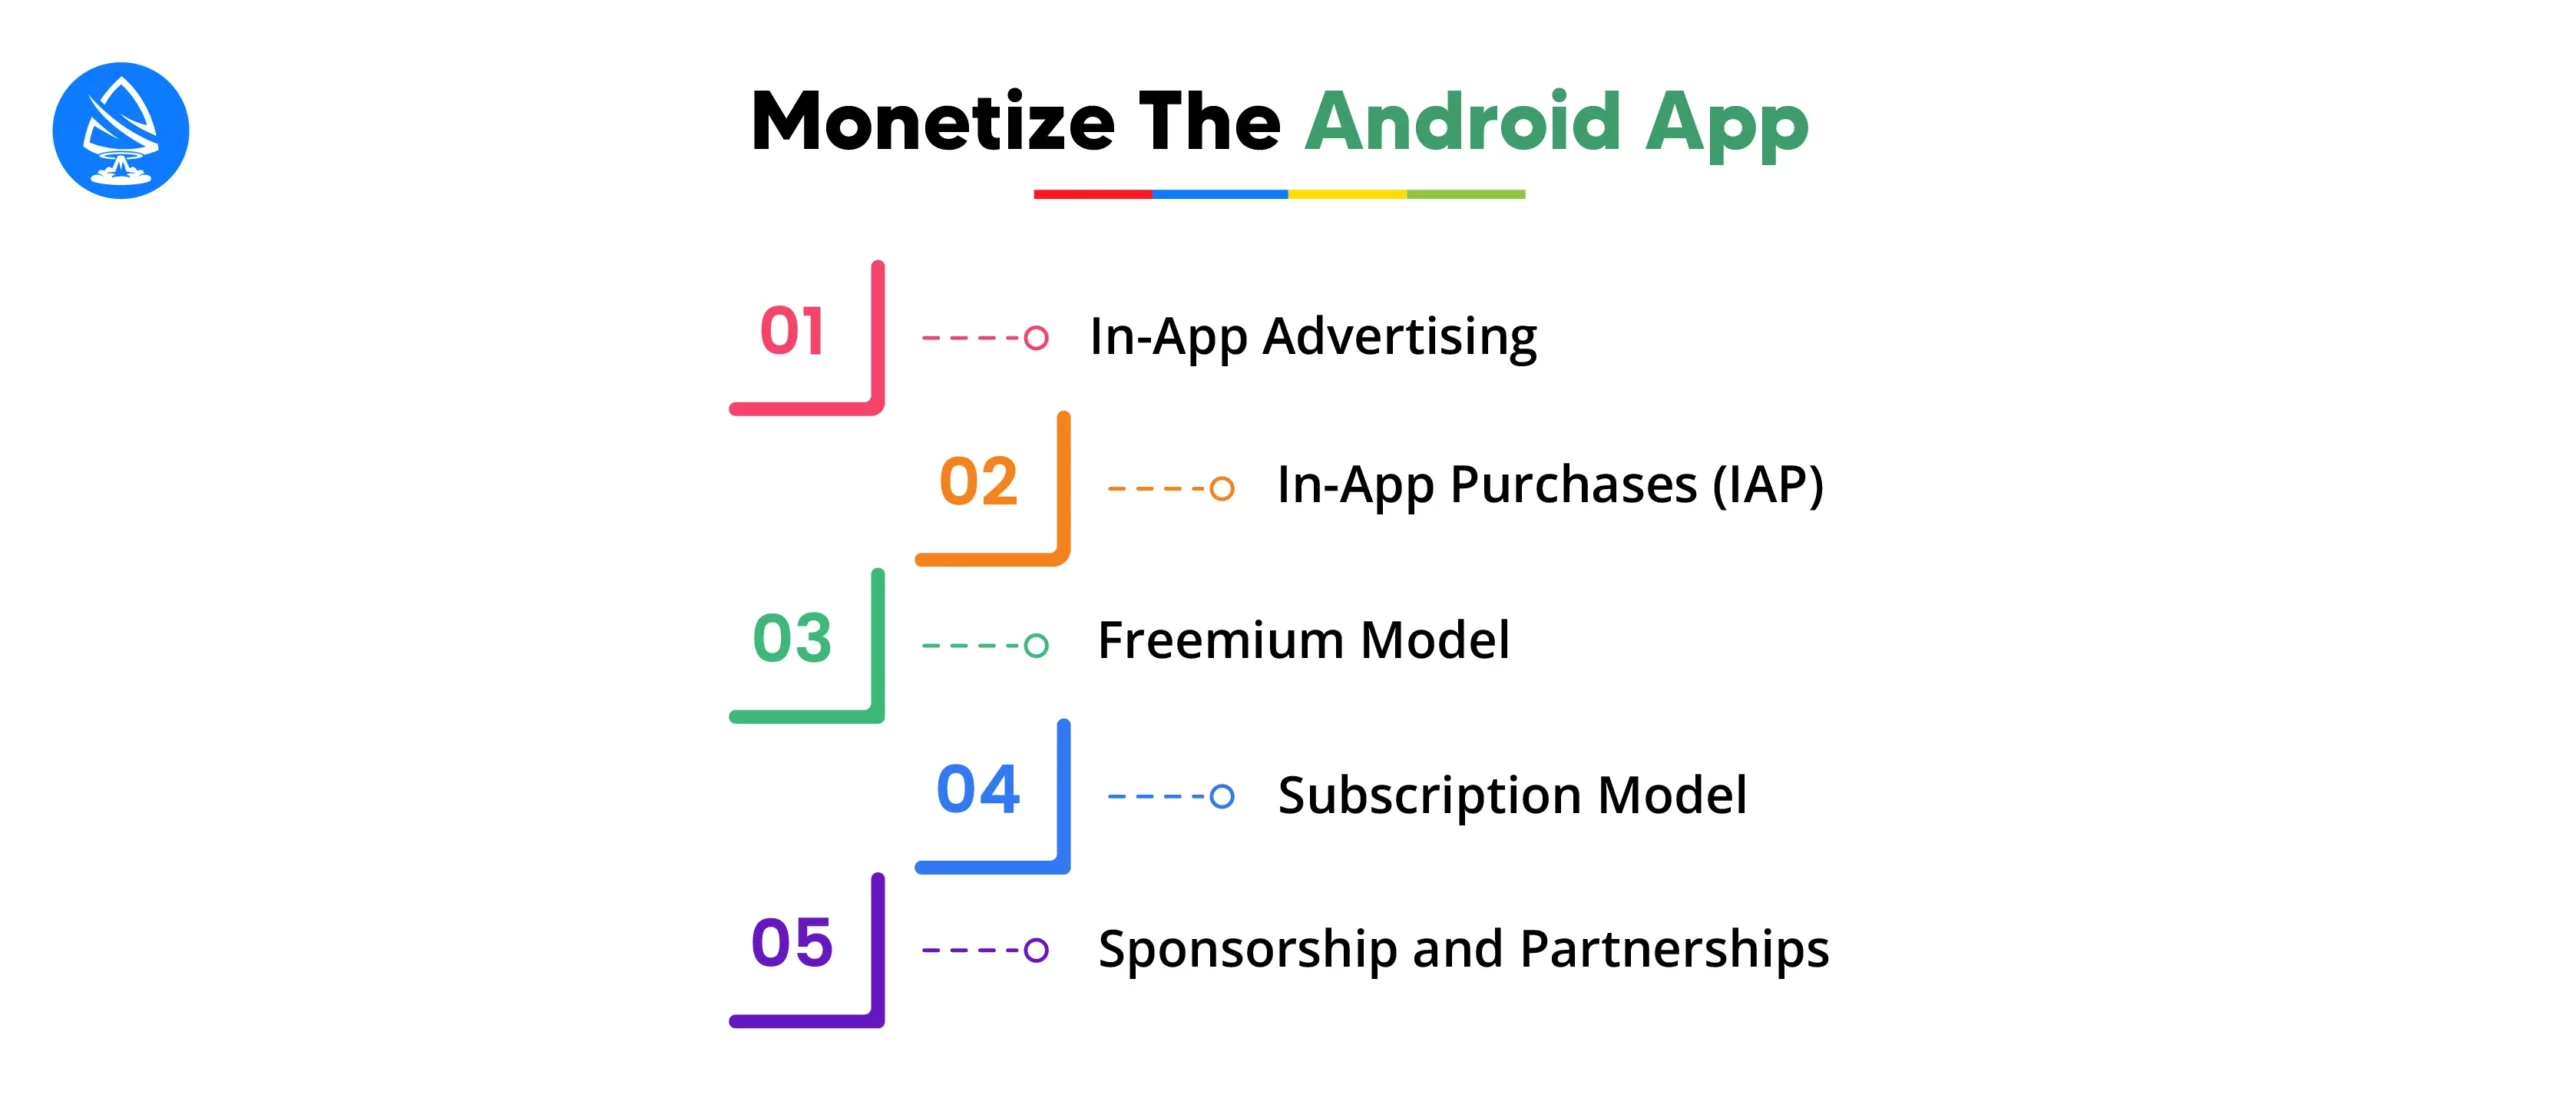 Monetize The Android App